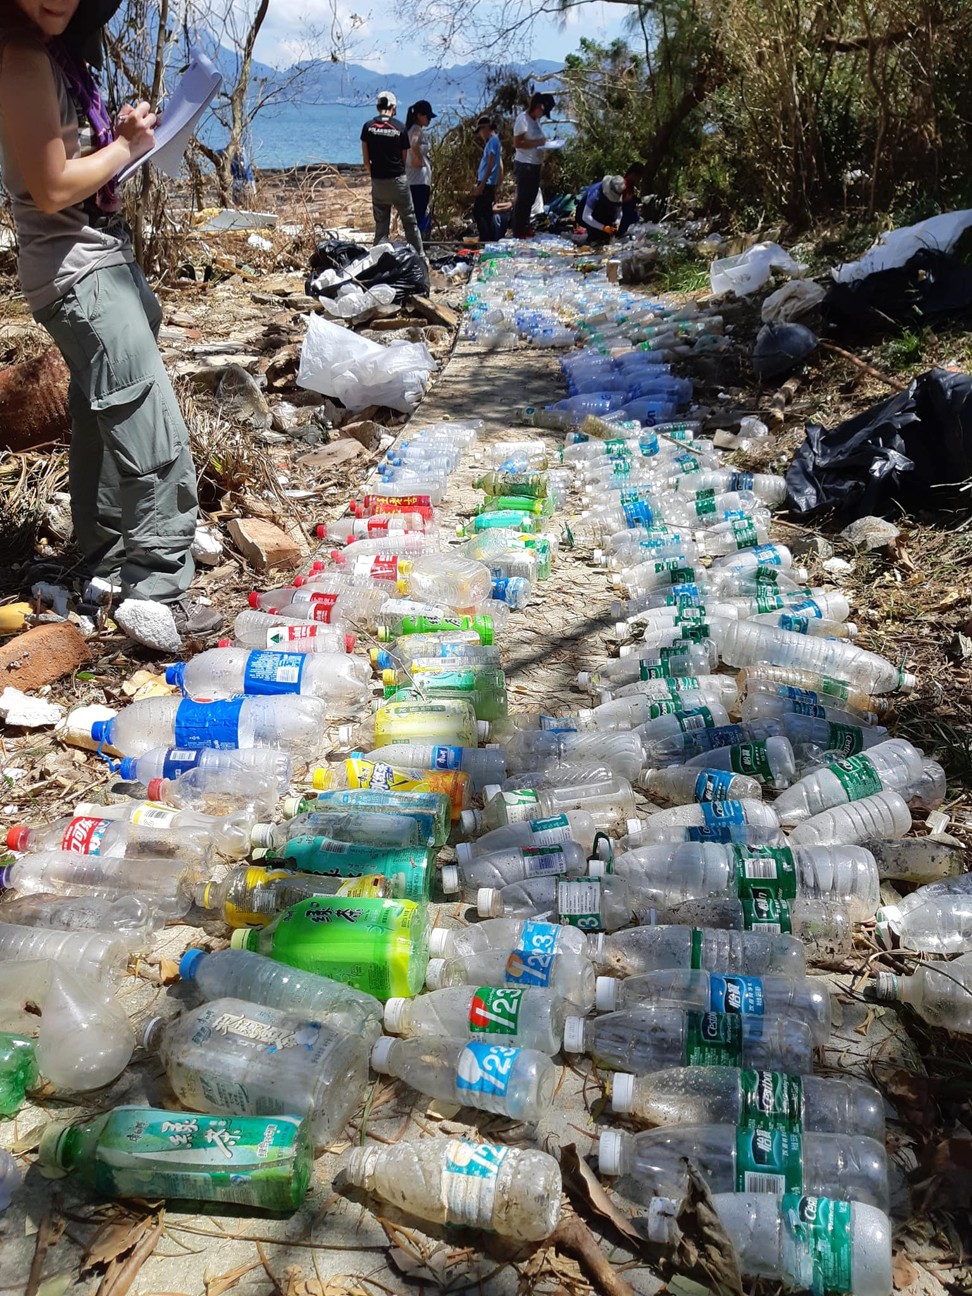 Plastic bottles found on the beach in Ping Chau. Photo: Facebook